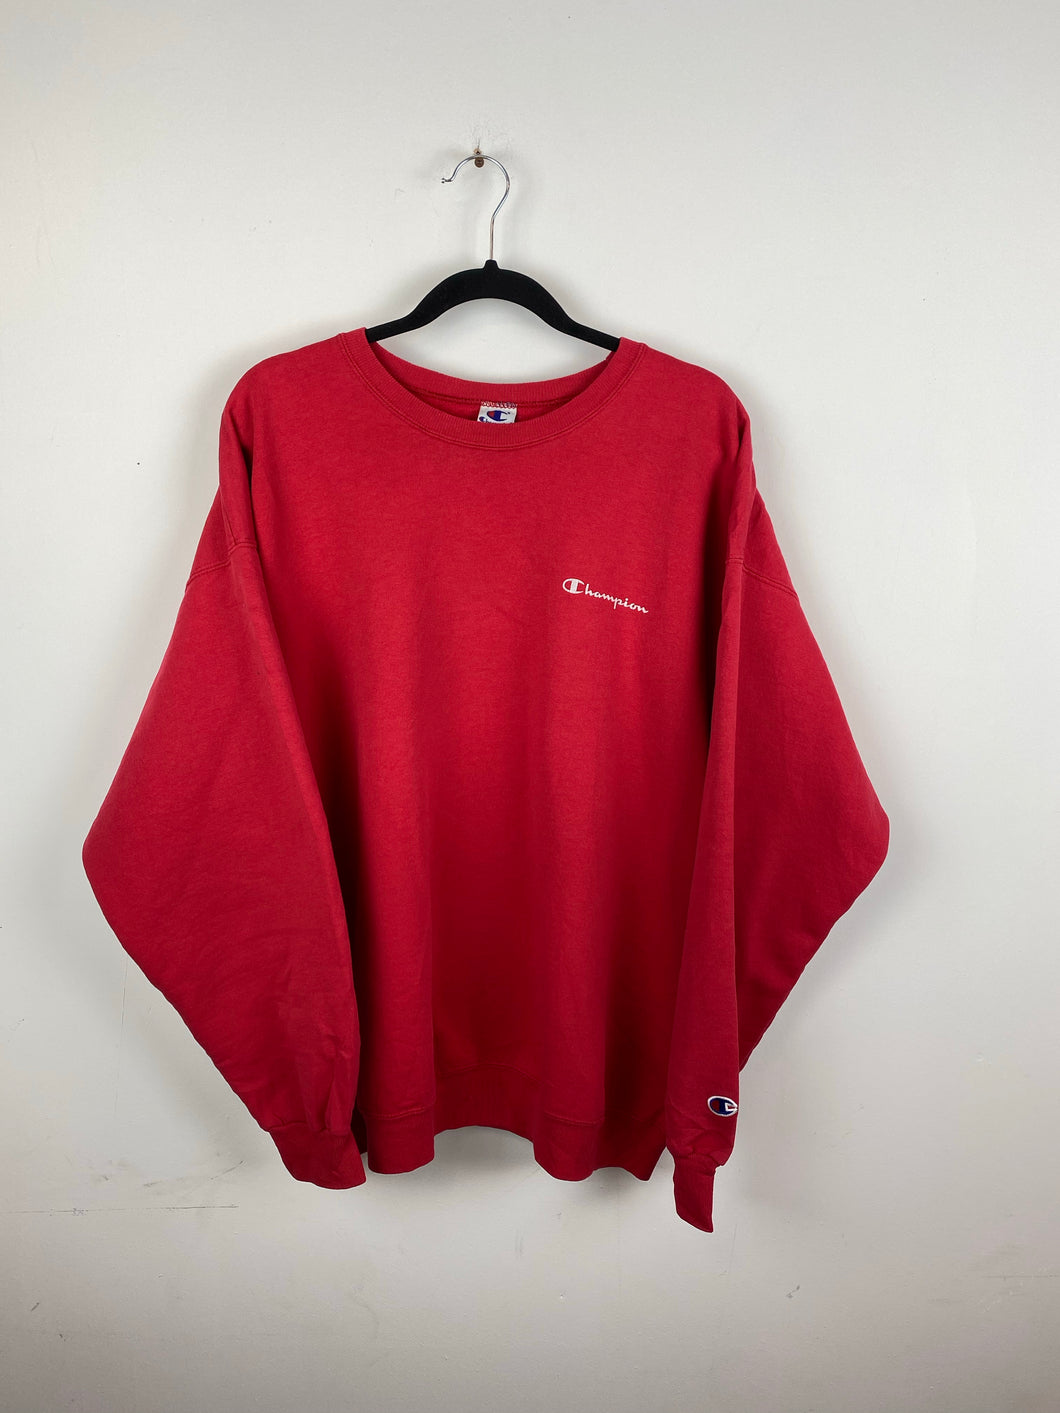 Authentic Champion spell out crewneck